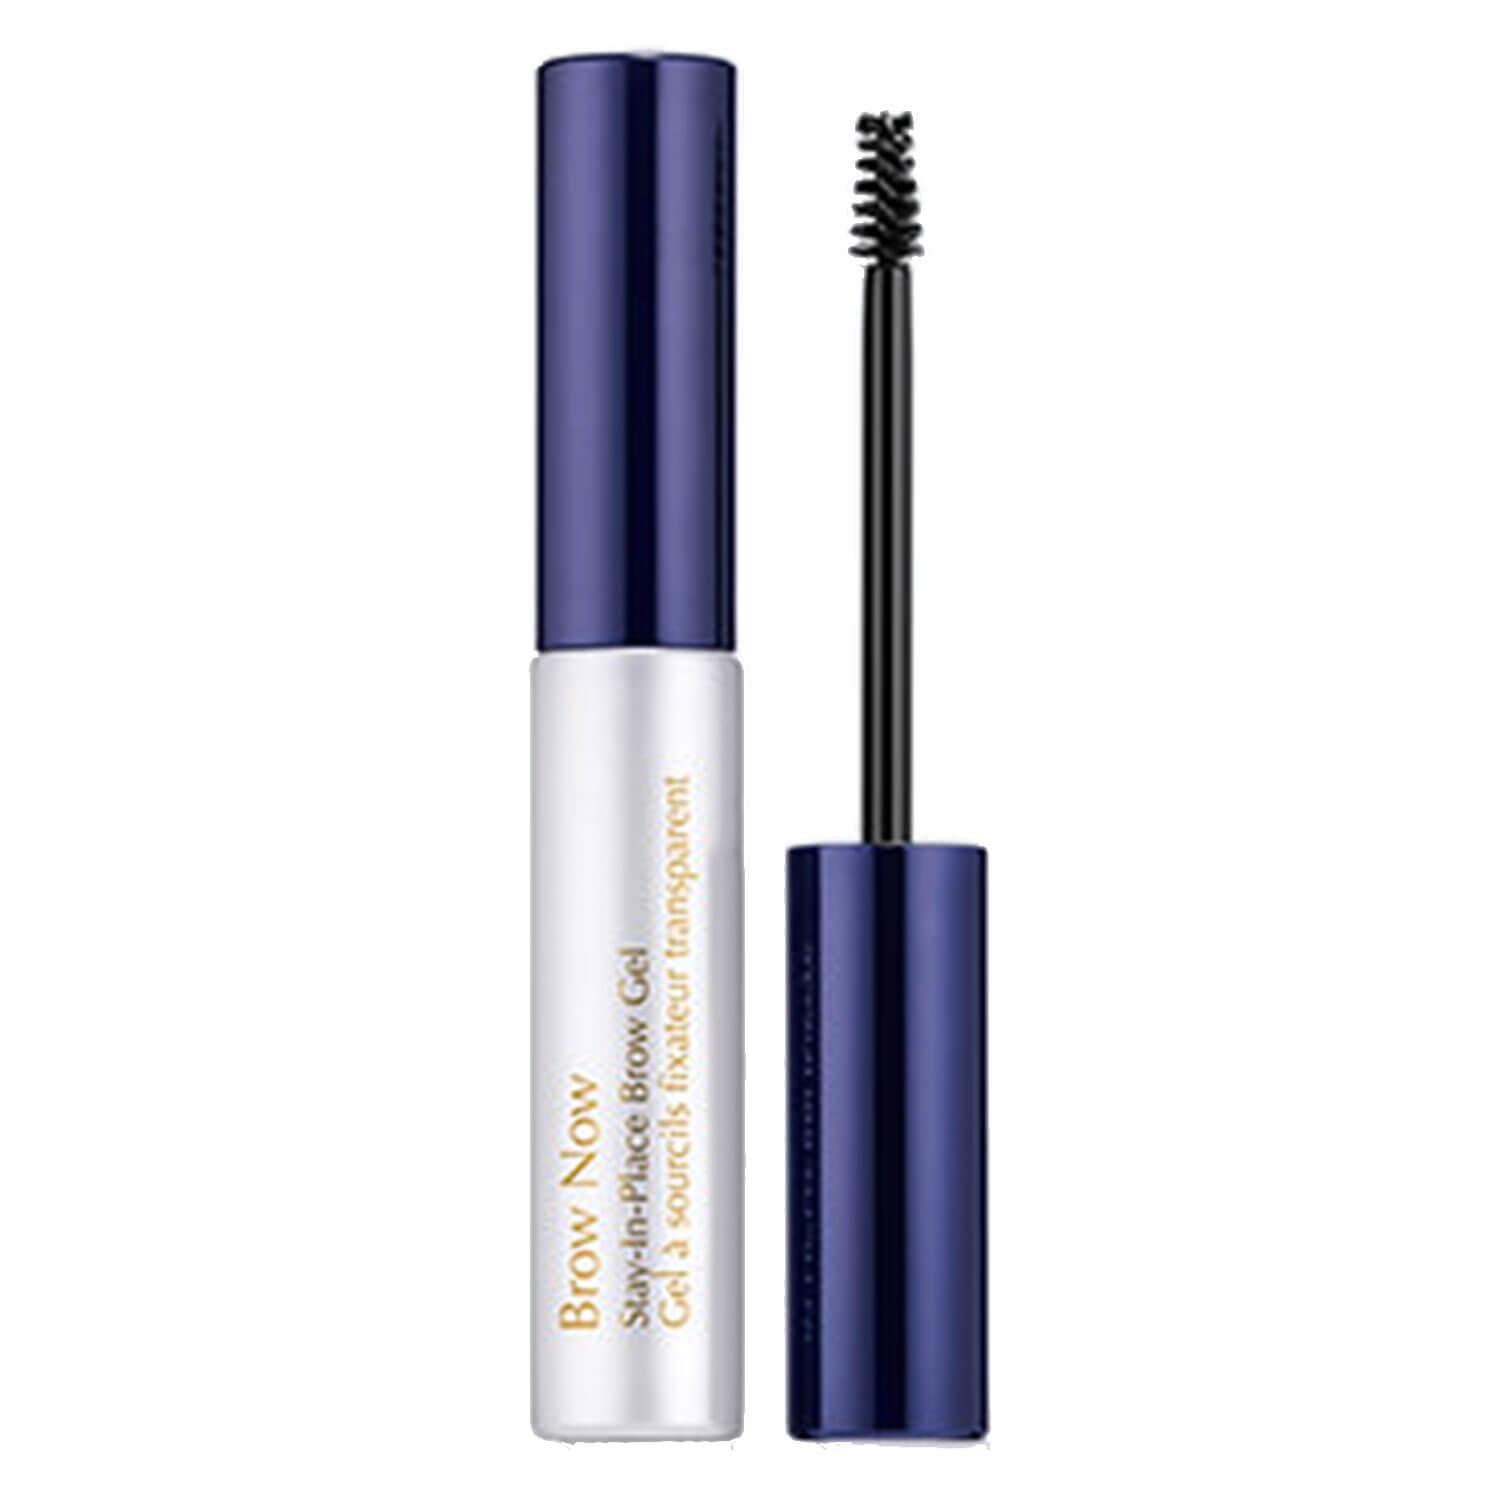 Brow Now - Stay-In-Place Brow Gel